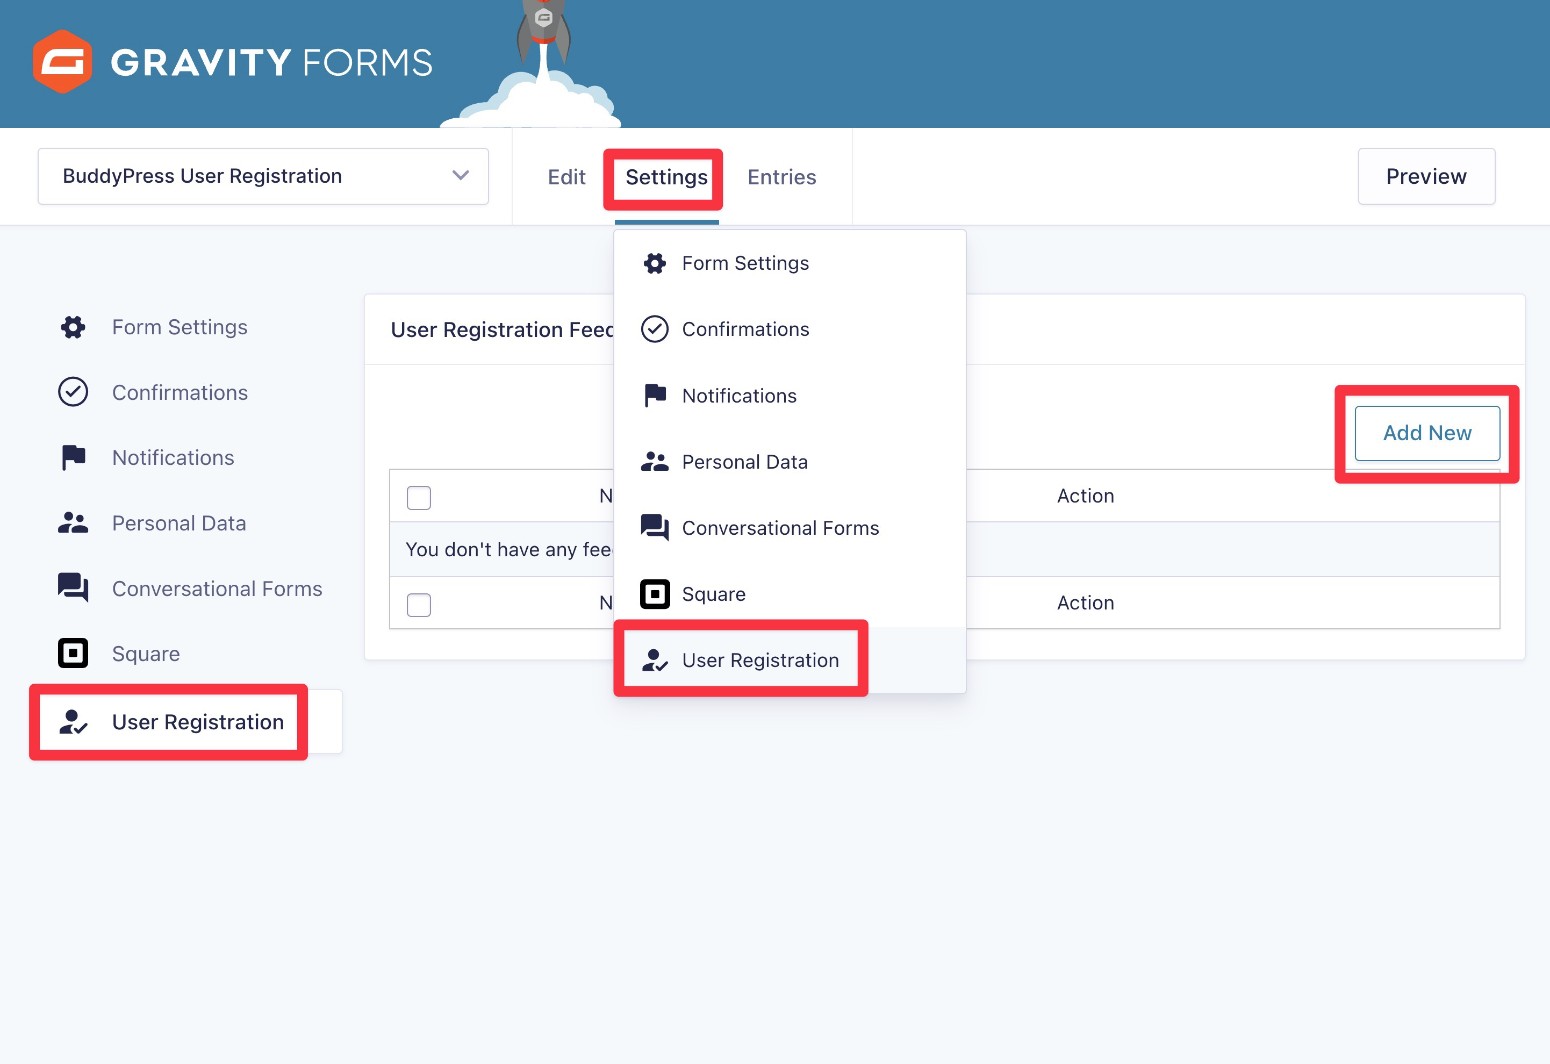 Create a user registration feed